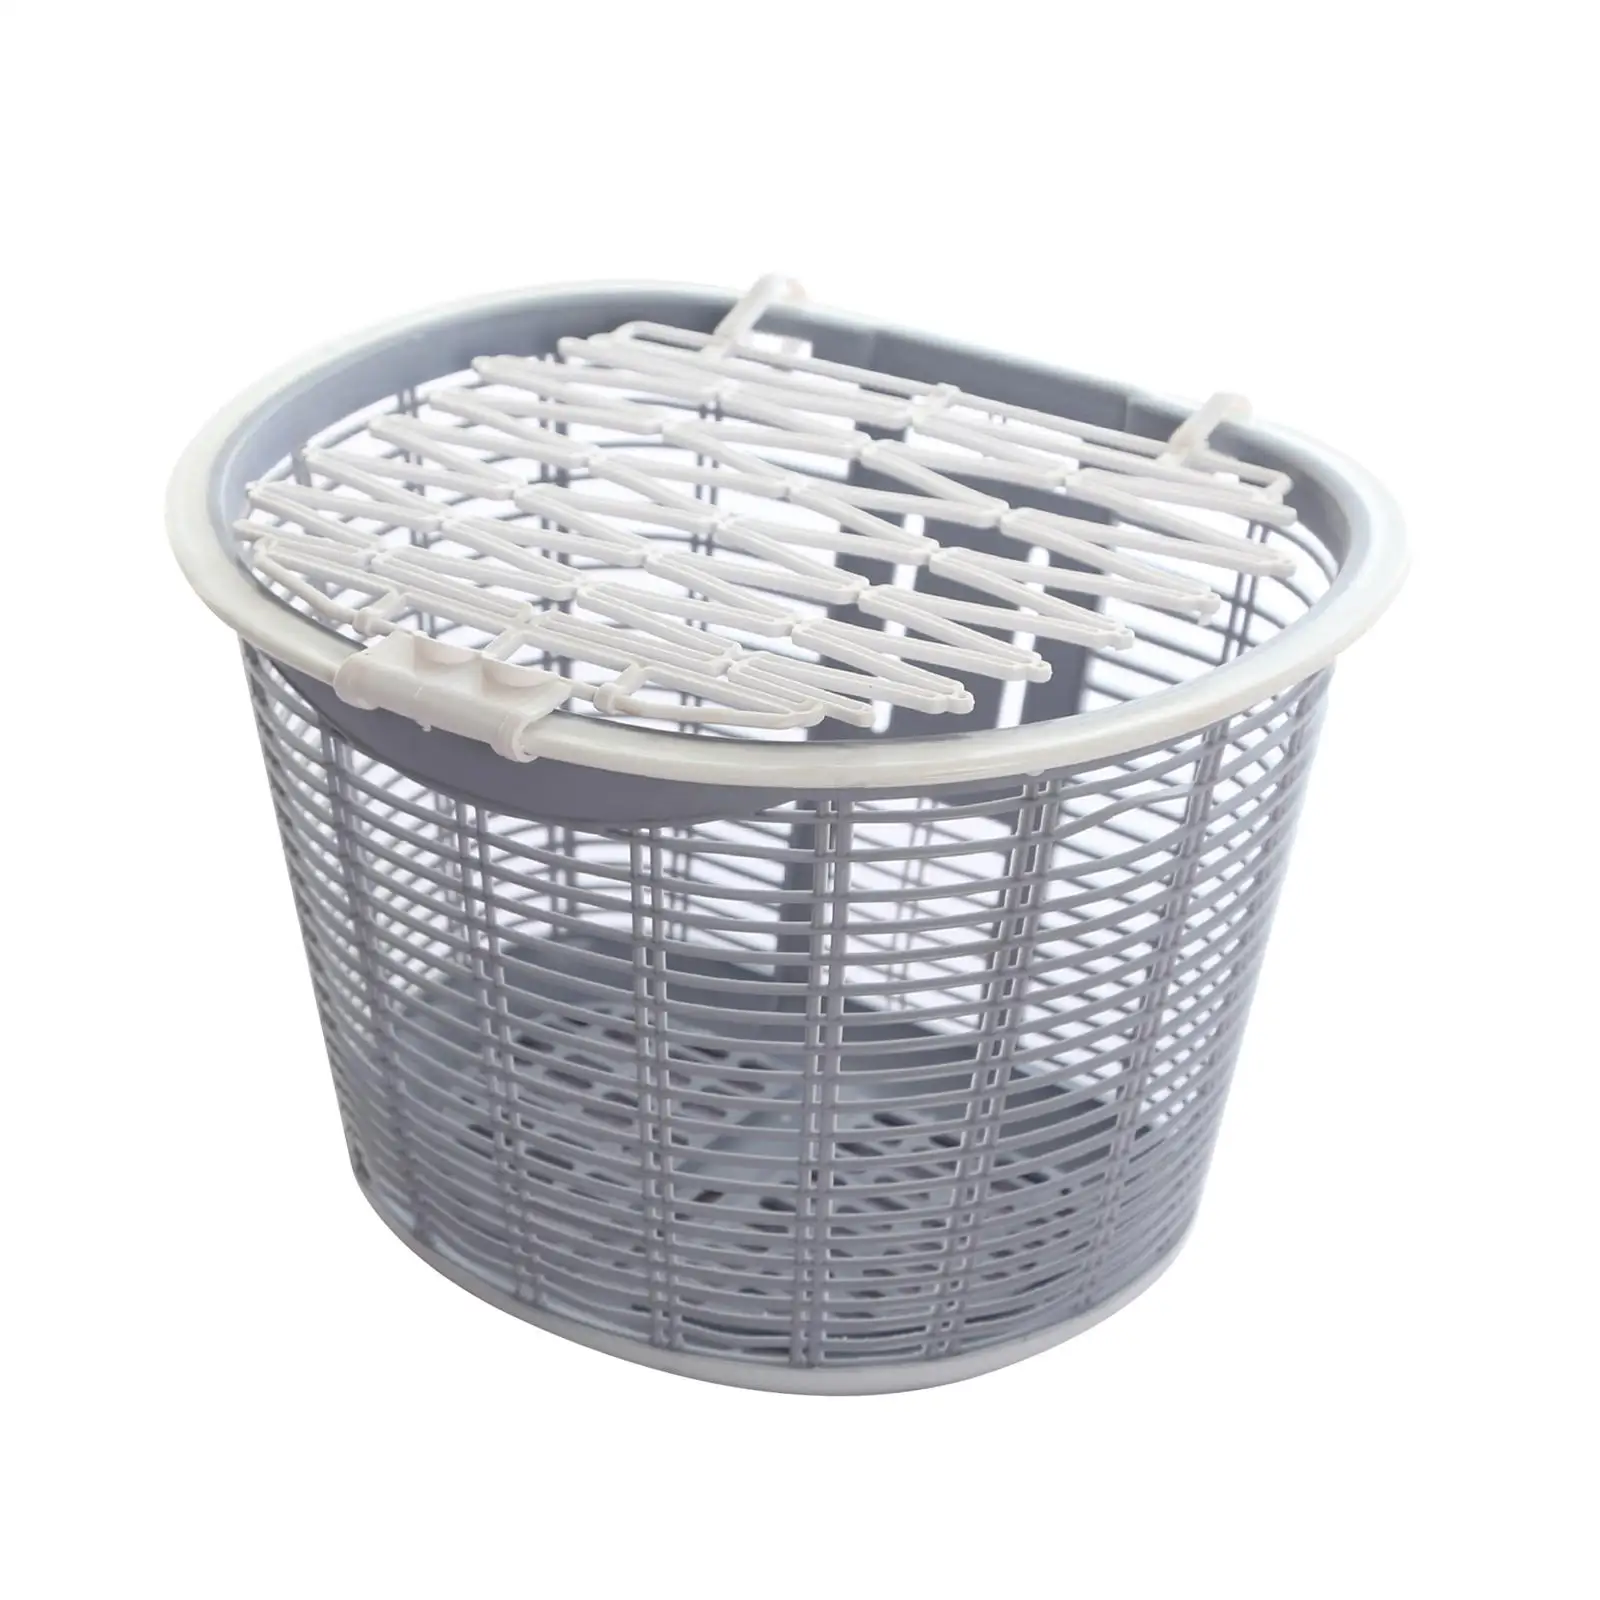 Bike Basket Easy to Install with Cover Detachable Bicycle Basket for Travel Balance Bike Mountain Road Bike Outdoor Equipment